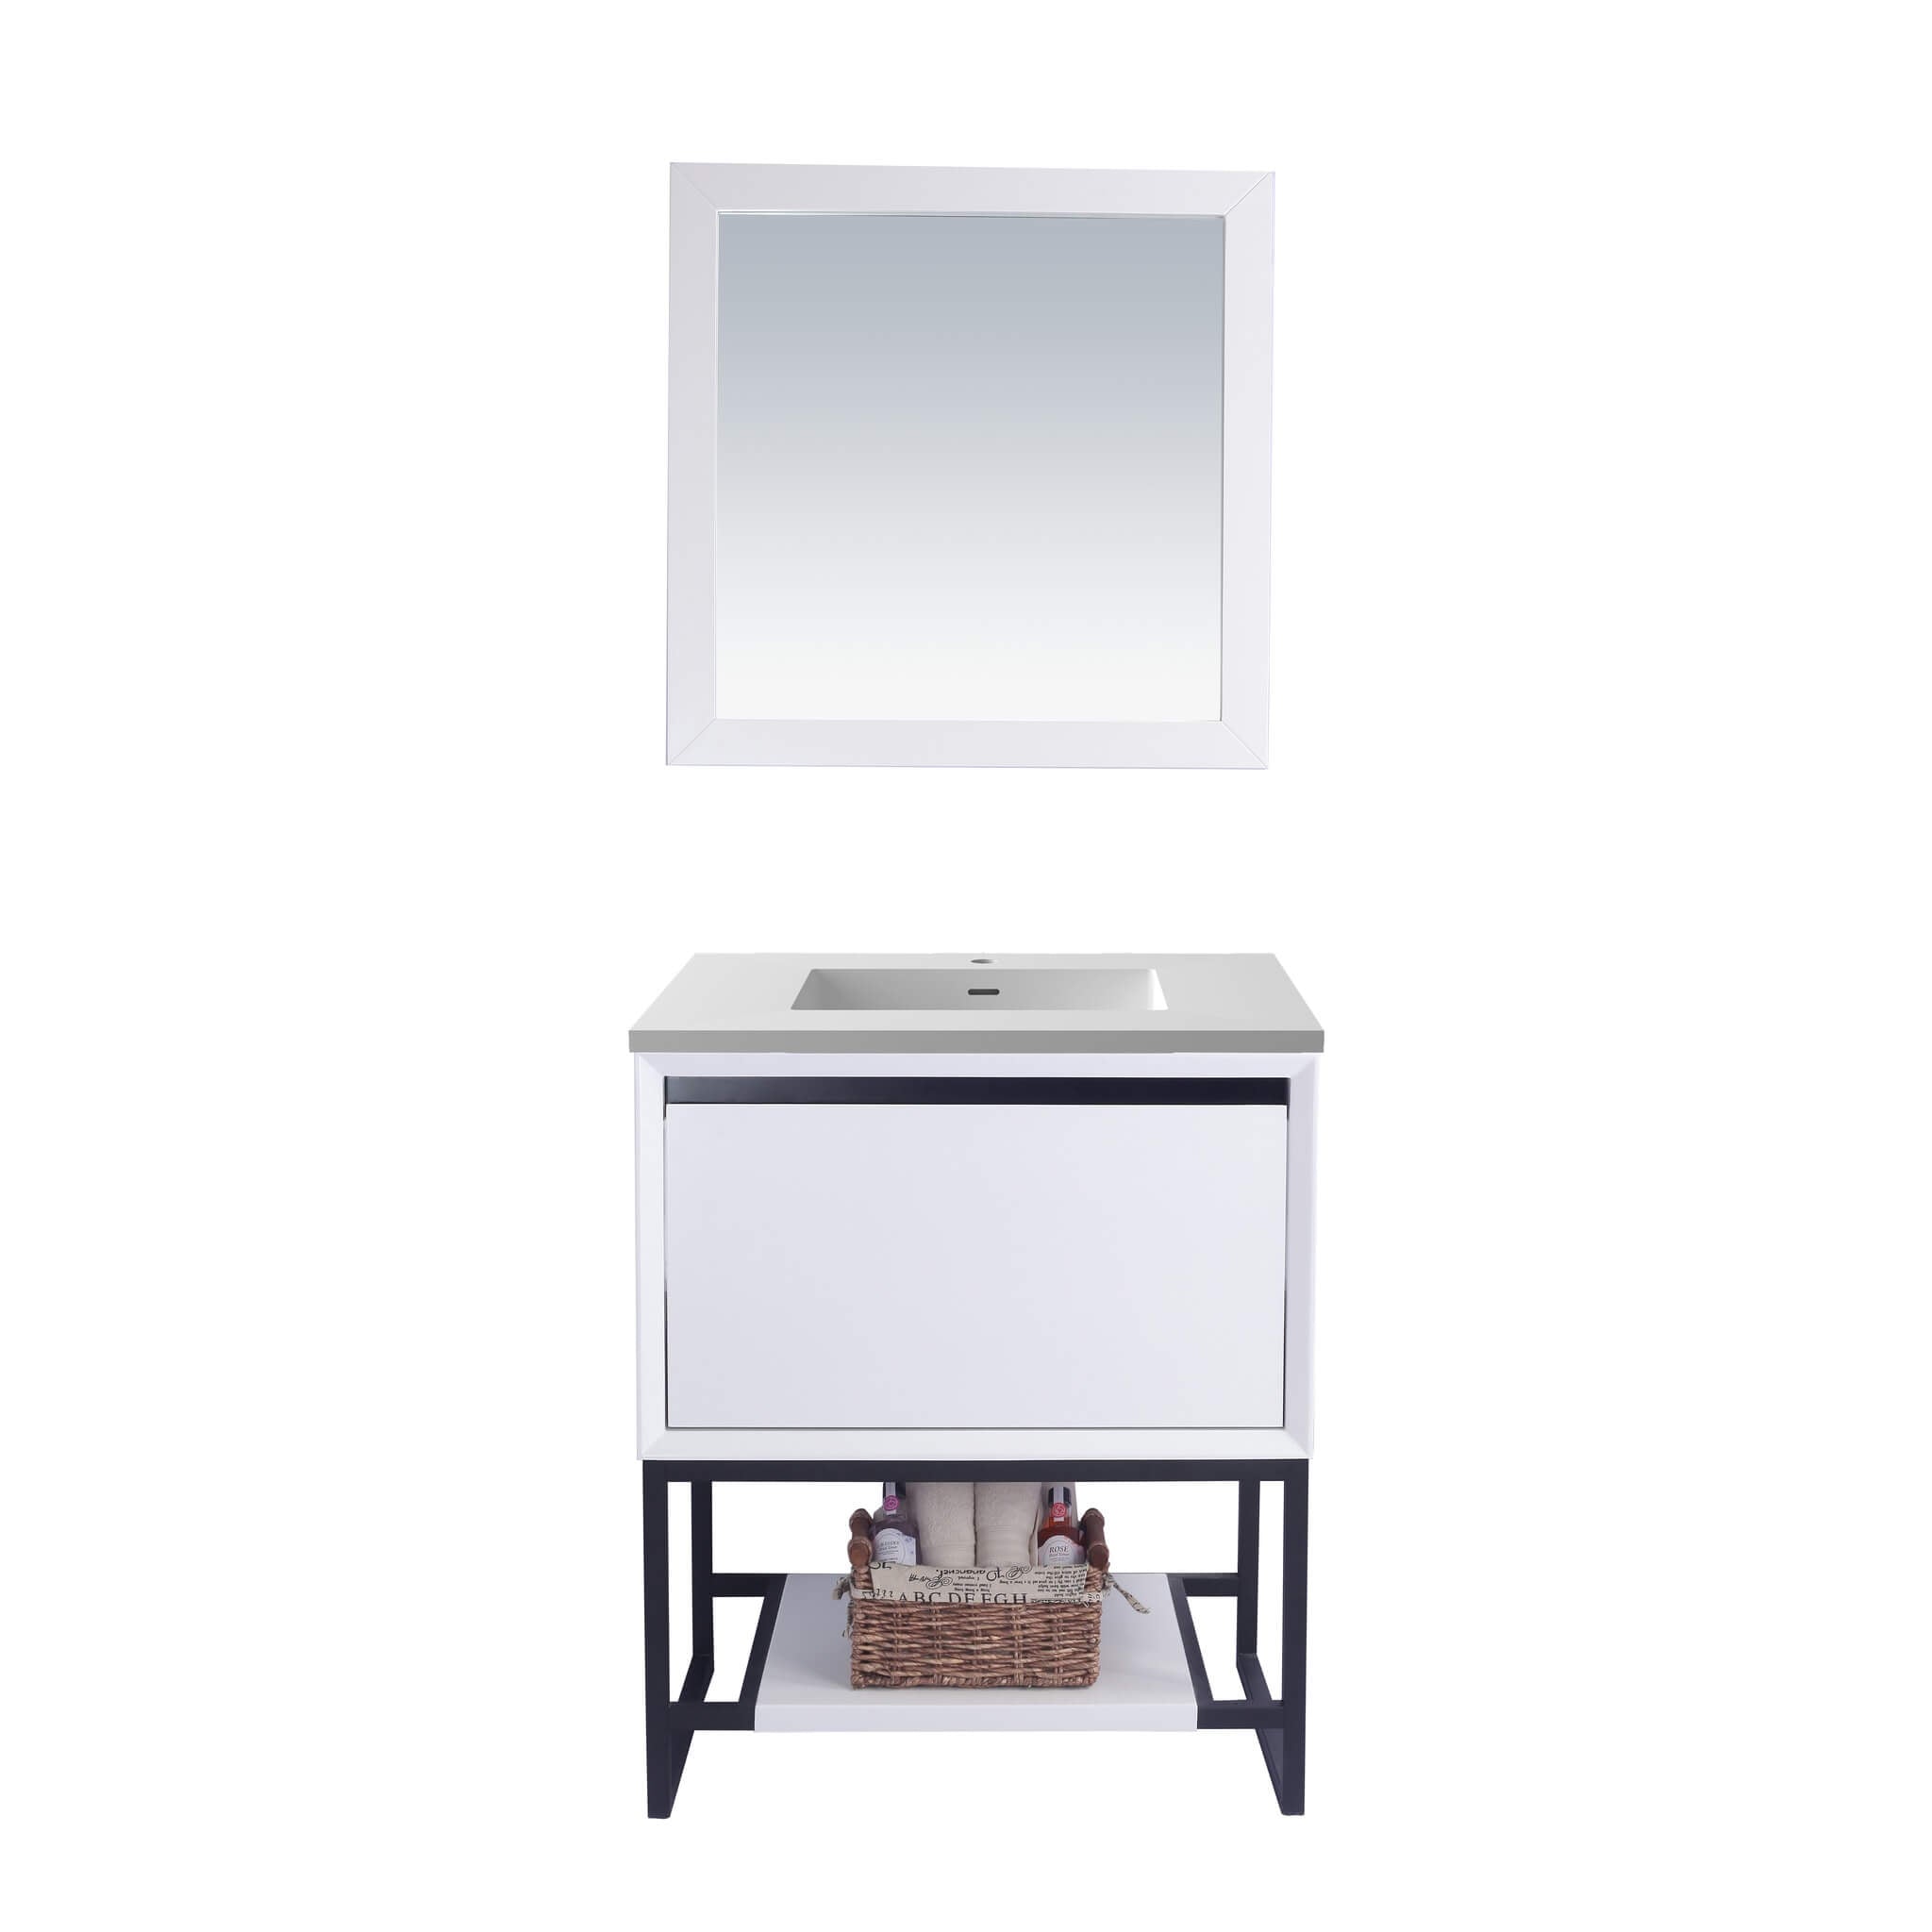 LAVIVA Alto 313SMR-30W-MW 30" Single Bathroom Vanity in White with Matte White VIVA Stone Surface, Integrated Sink, Front View